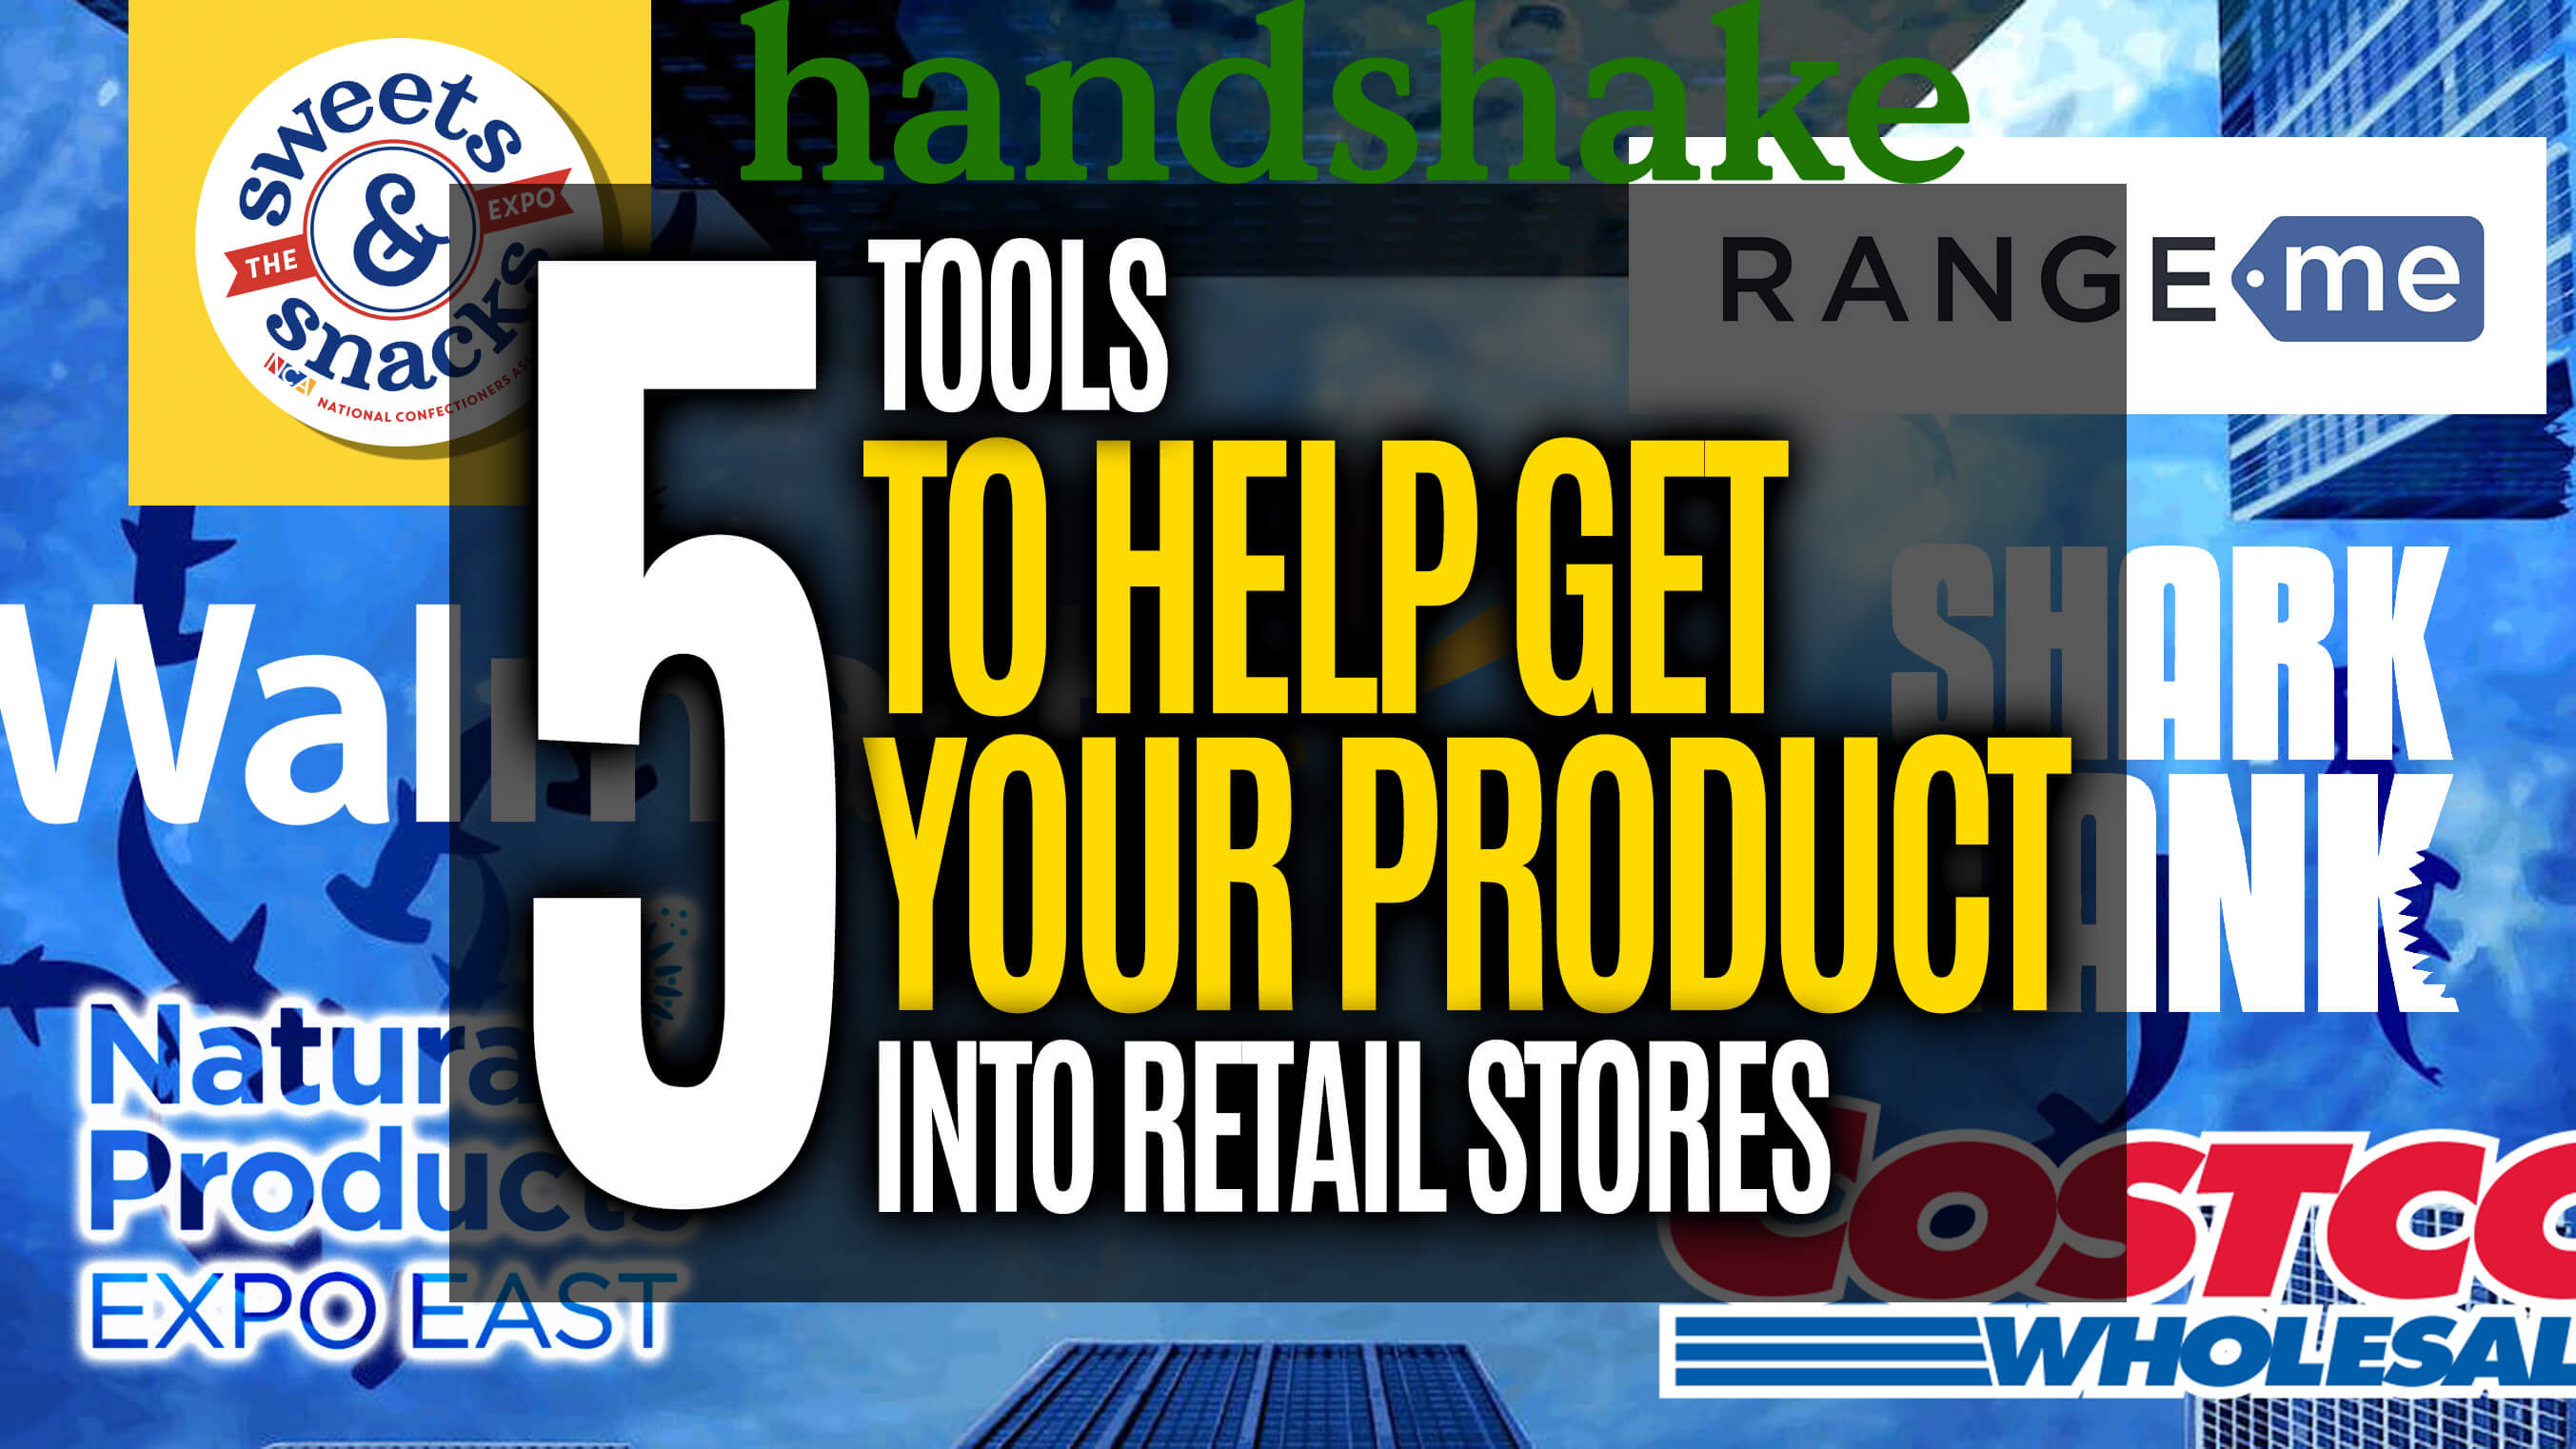 5 TOOLS TO HELP GET YOUR PRODUCT INTO RETAIL STORES